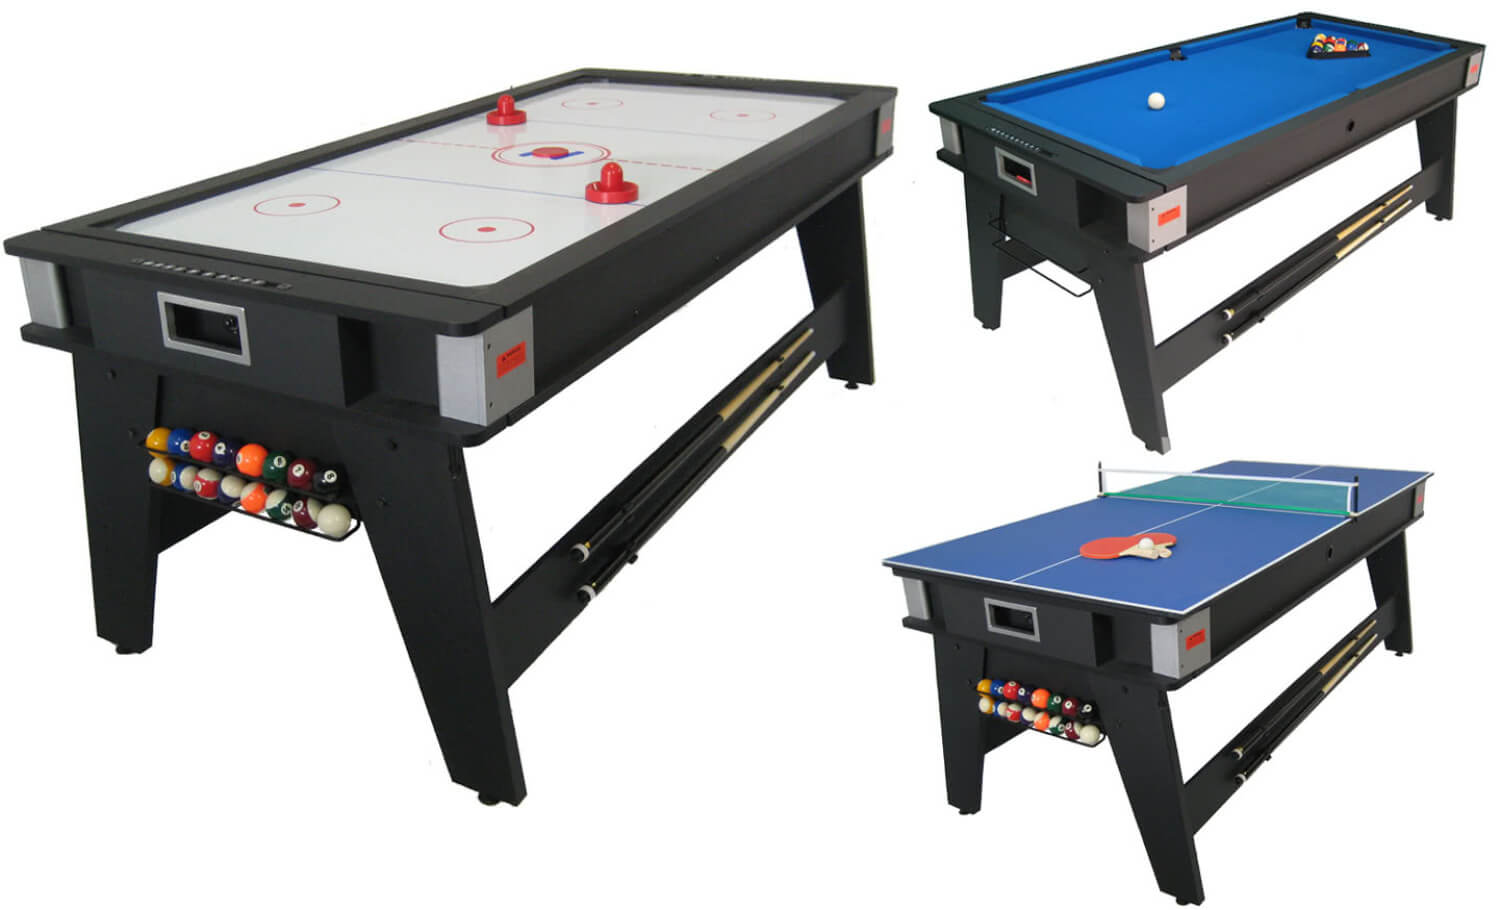 Strikeworth 6 foot Multi Games Table | Free Delivery ...